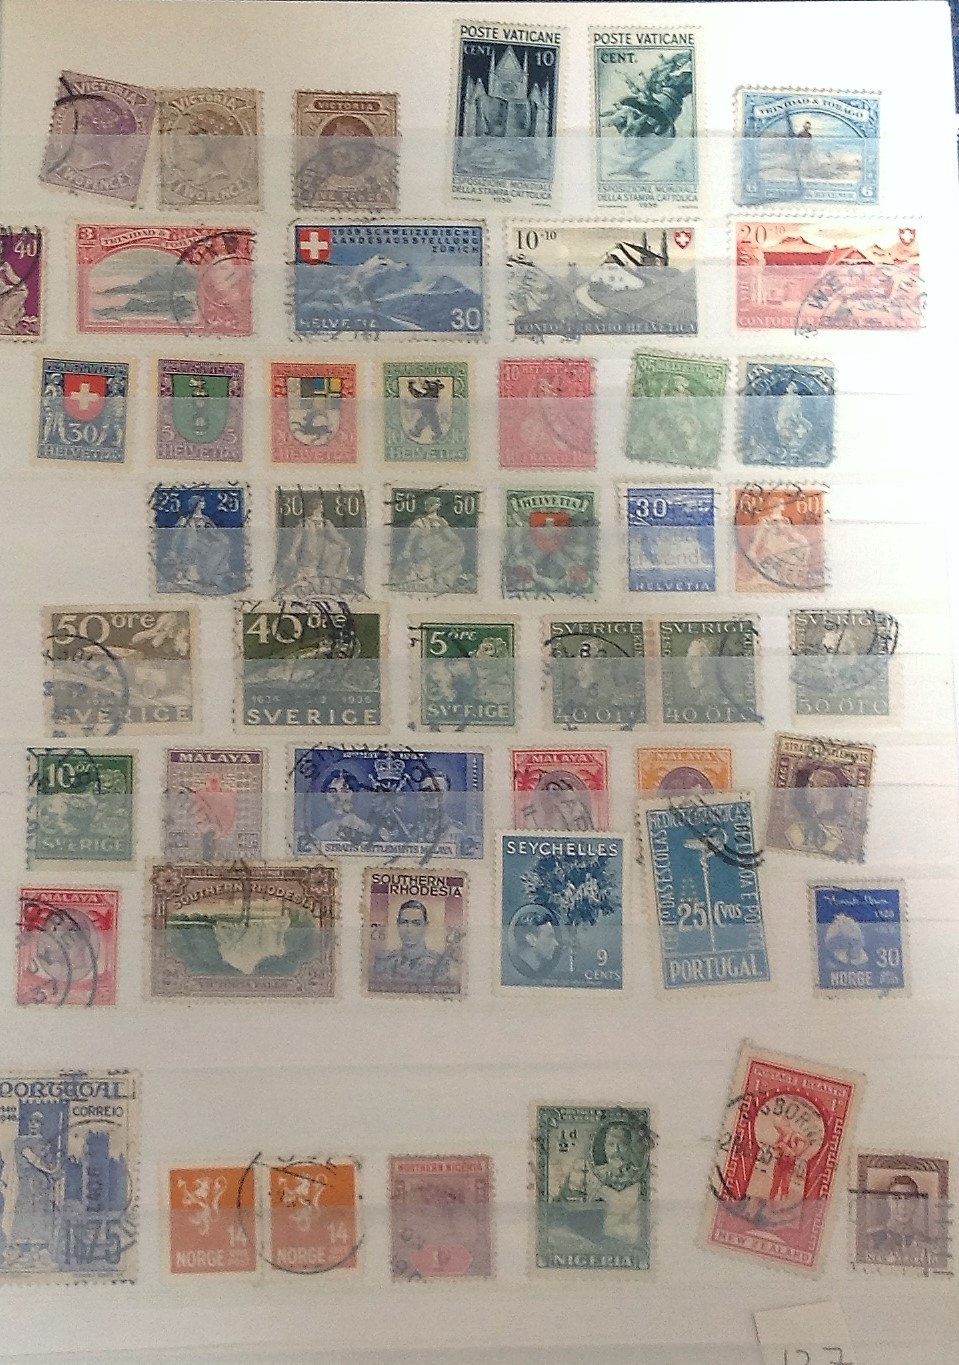 GB and Commonwealth Stamp collection high value in Black Stock book. Range of countries covered